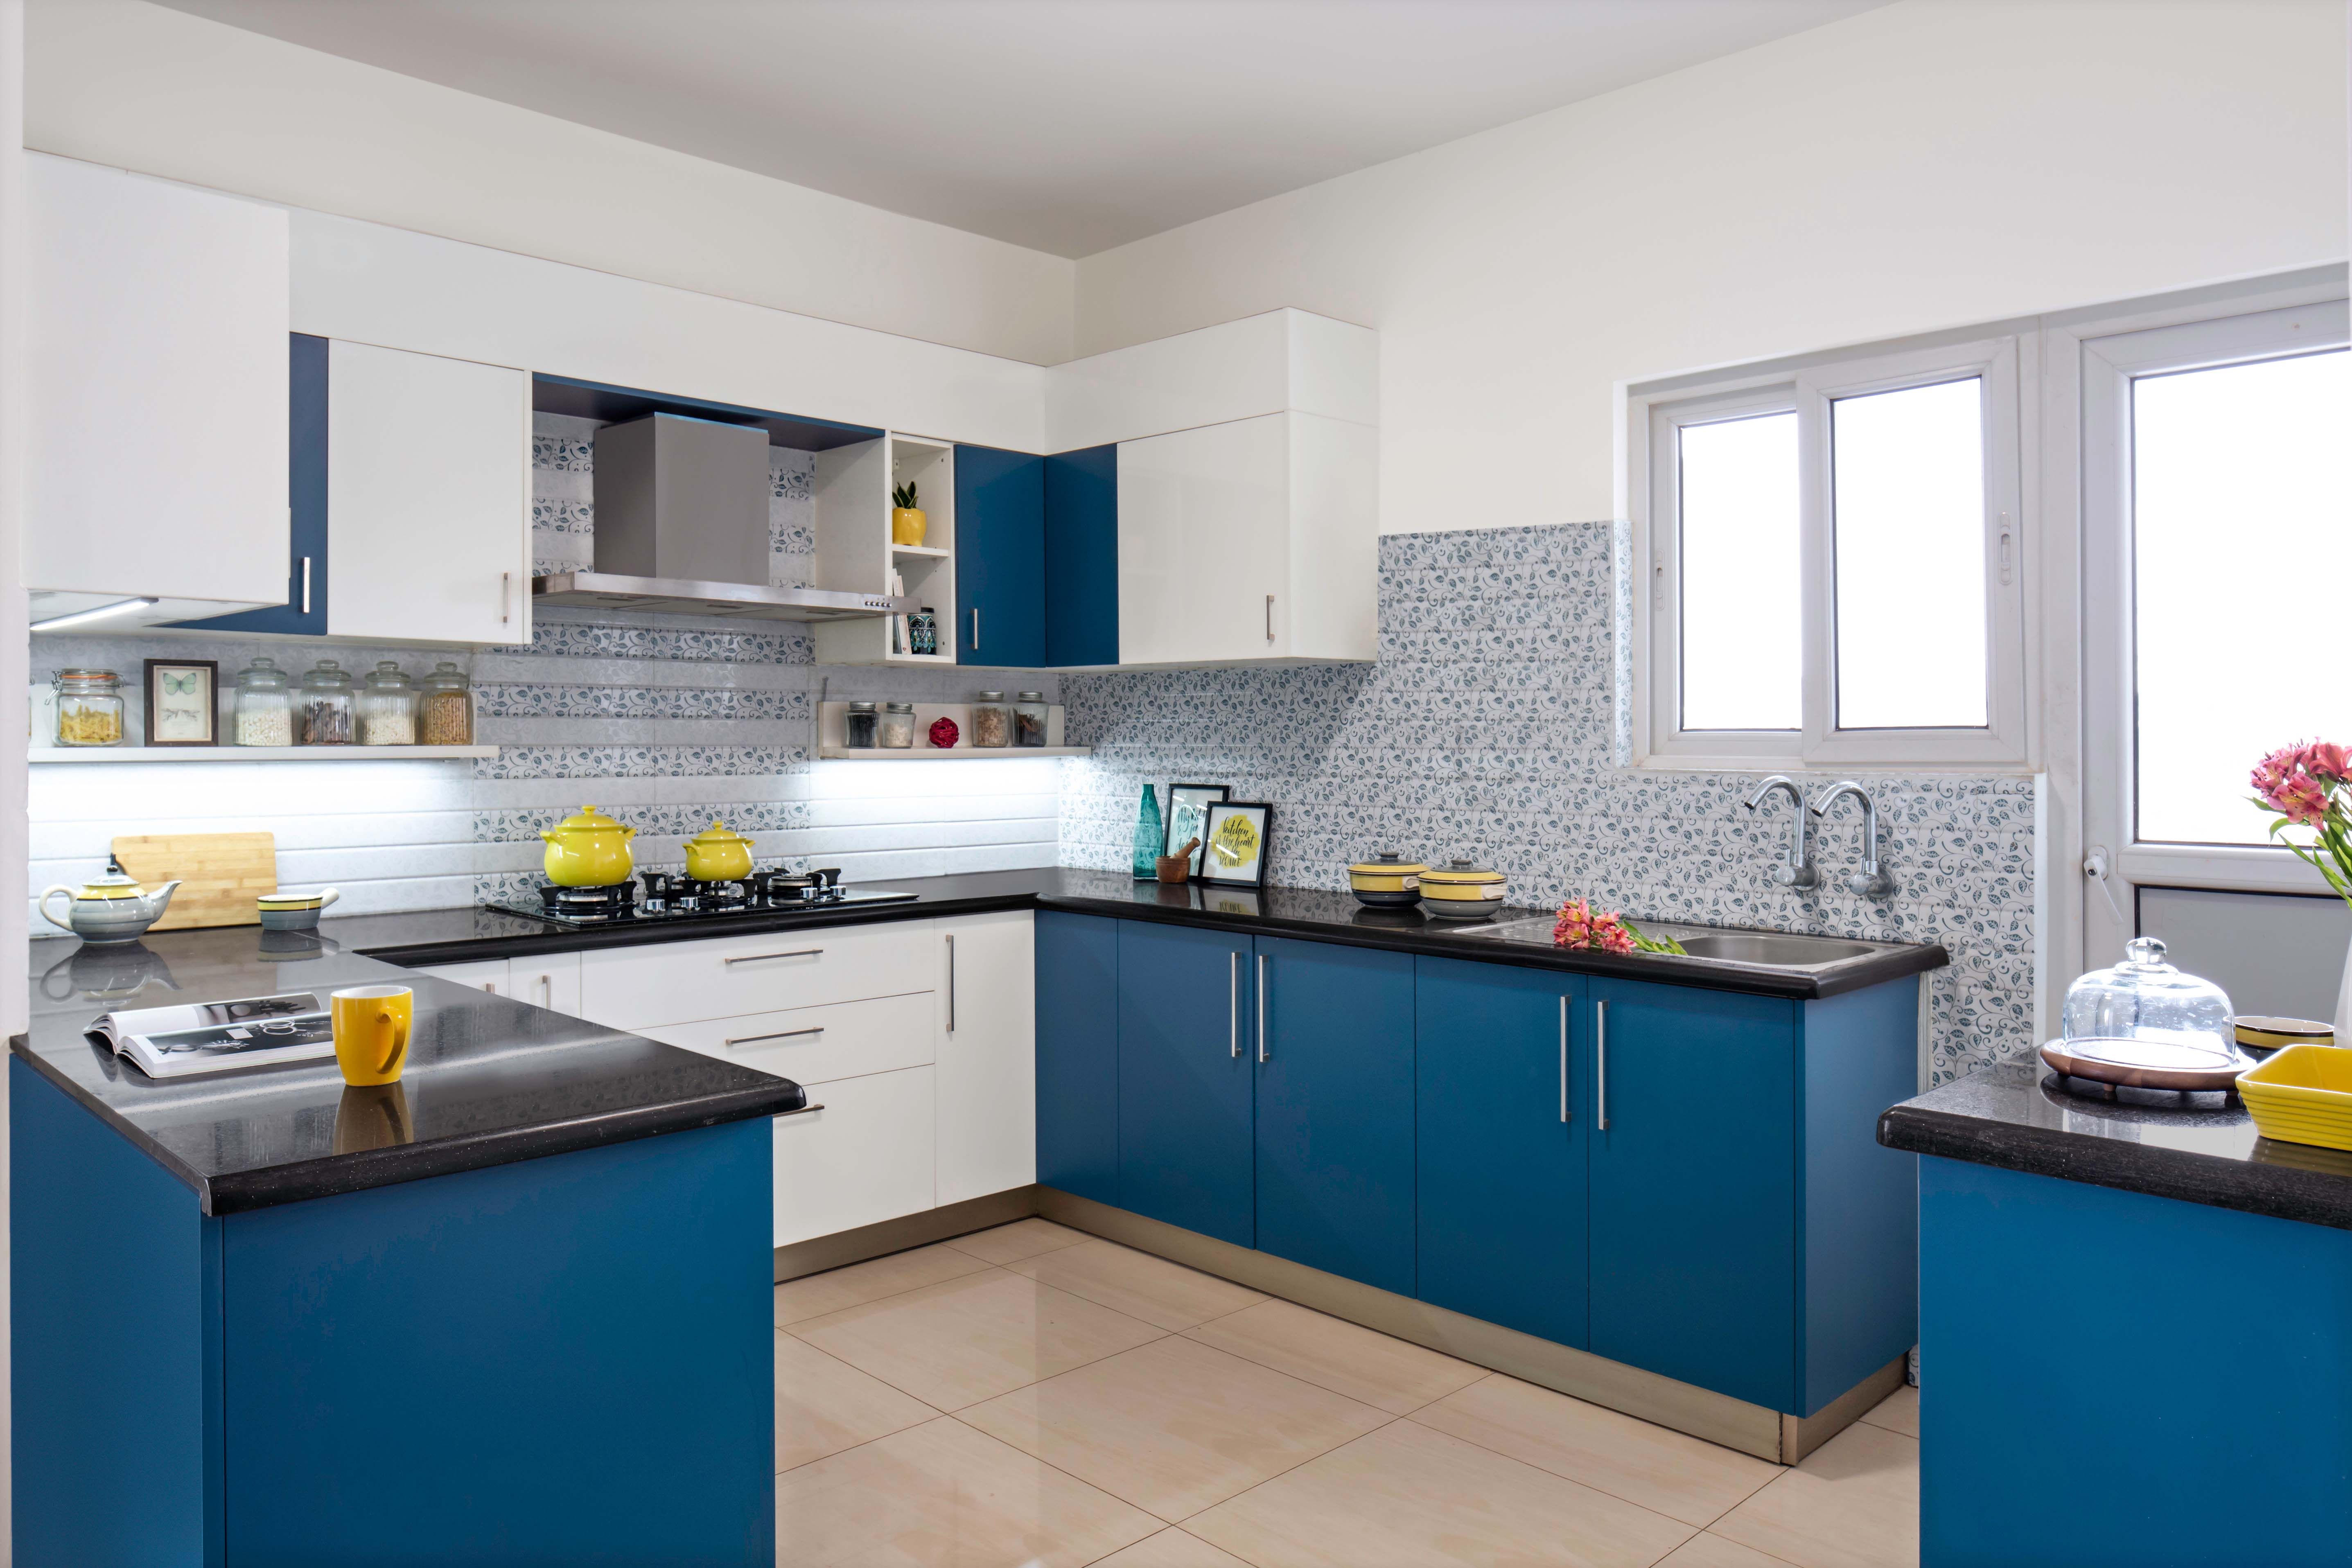 Contemporary Blue And White Modular U-Shaped Kitchen Cabinet Design With Leaf-Patterned Dado Tiles